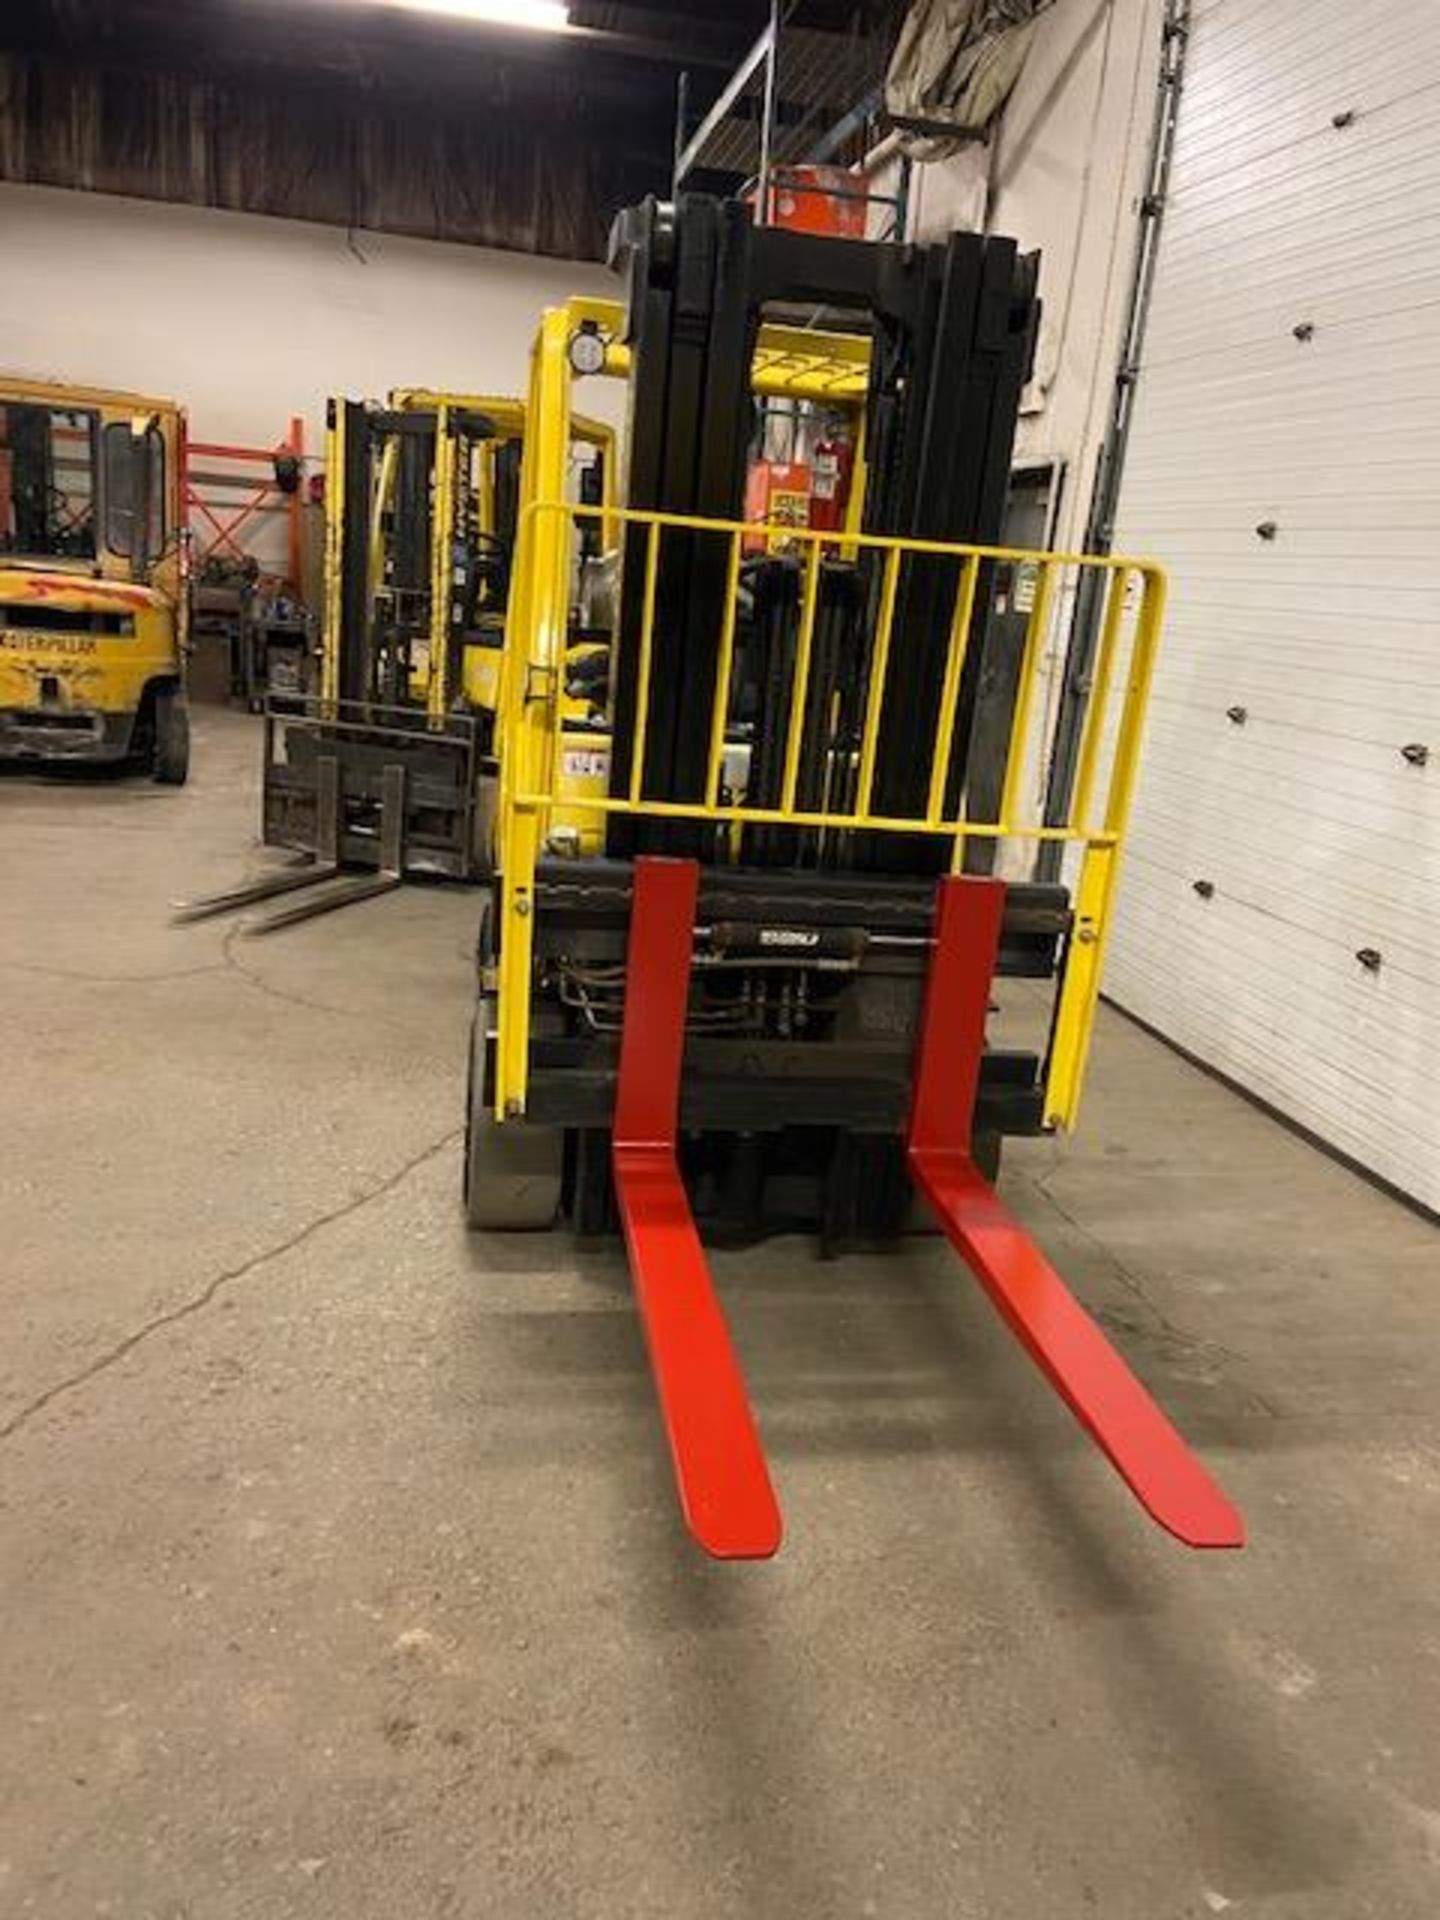 FREE CUSTOMS - 2015 Hyster 8000lbs capacity LPG (propane) Forklift with 3-stage mast & sideshift & - Image 2 of 2